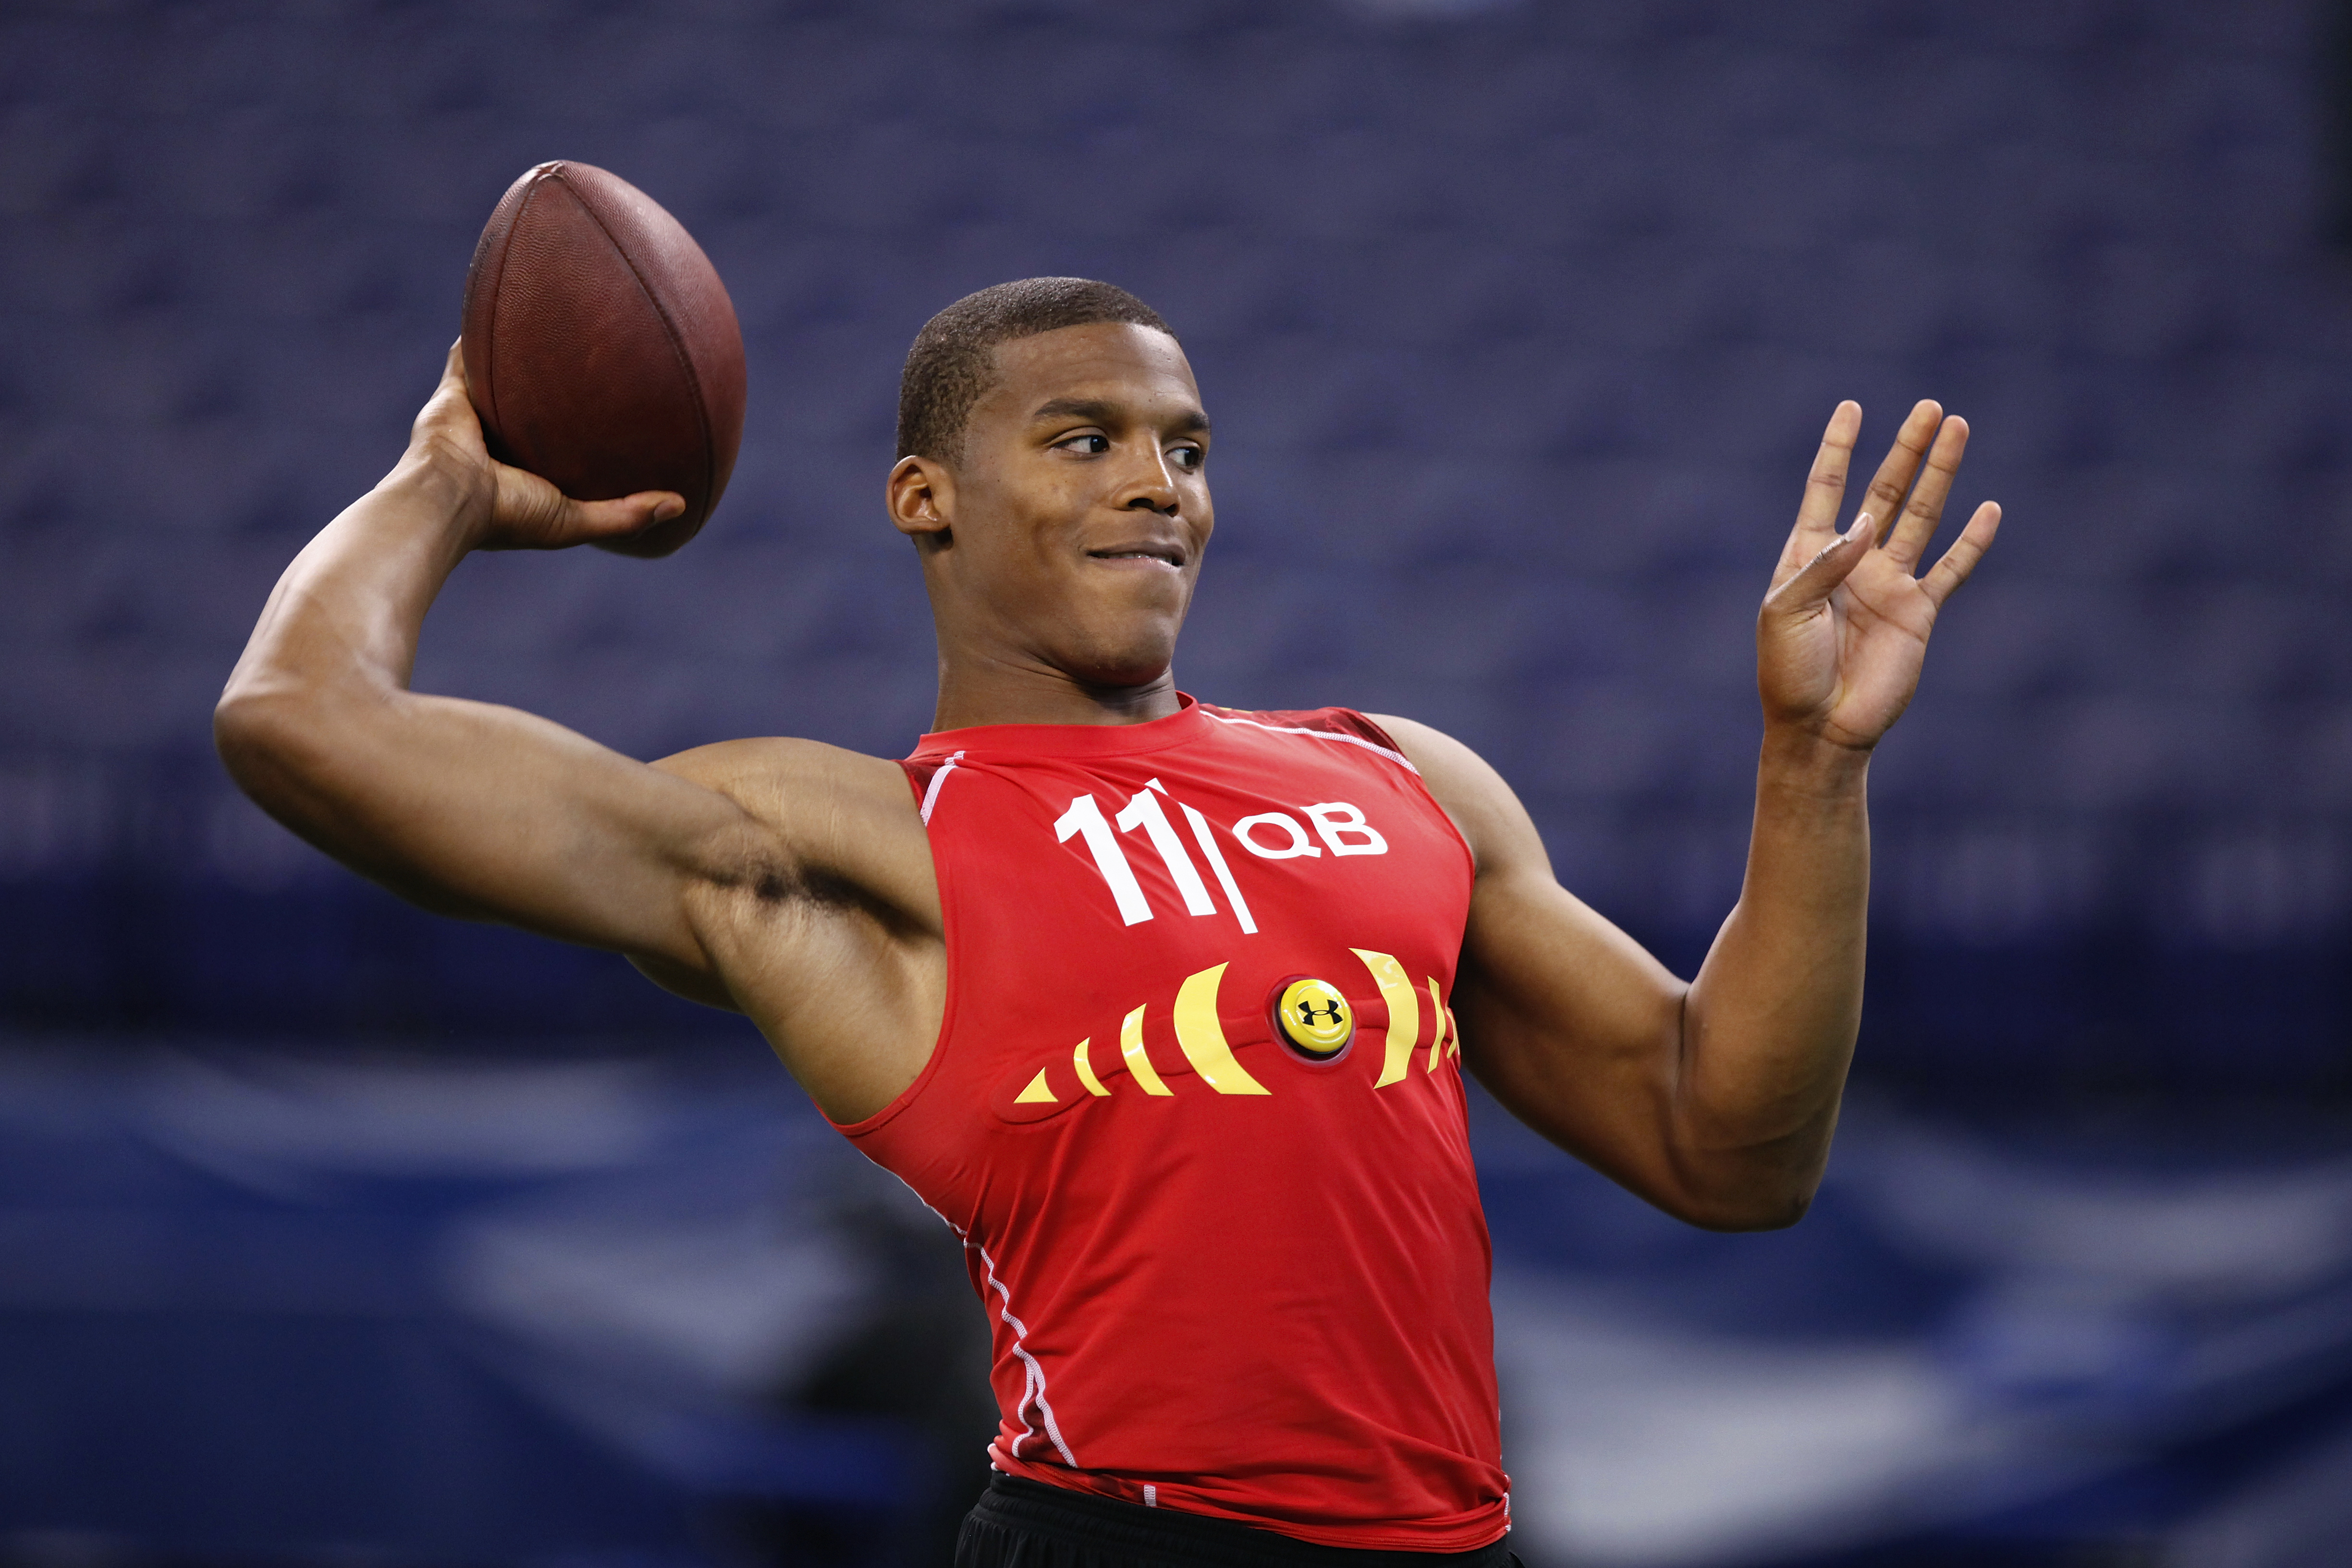 INDIANAPOLIS, IN - FEBRUARY 27: Cam Newton passes the ball during the 2011 NFL Scouting Combine at Lucas Oil Stadium on February 27, 2011 in Indianapolis, Indiana. (Photo by Joe Robbins/Getty Images)